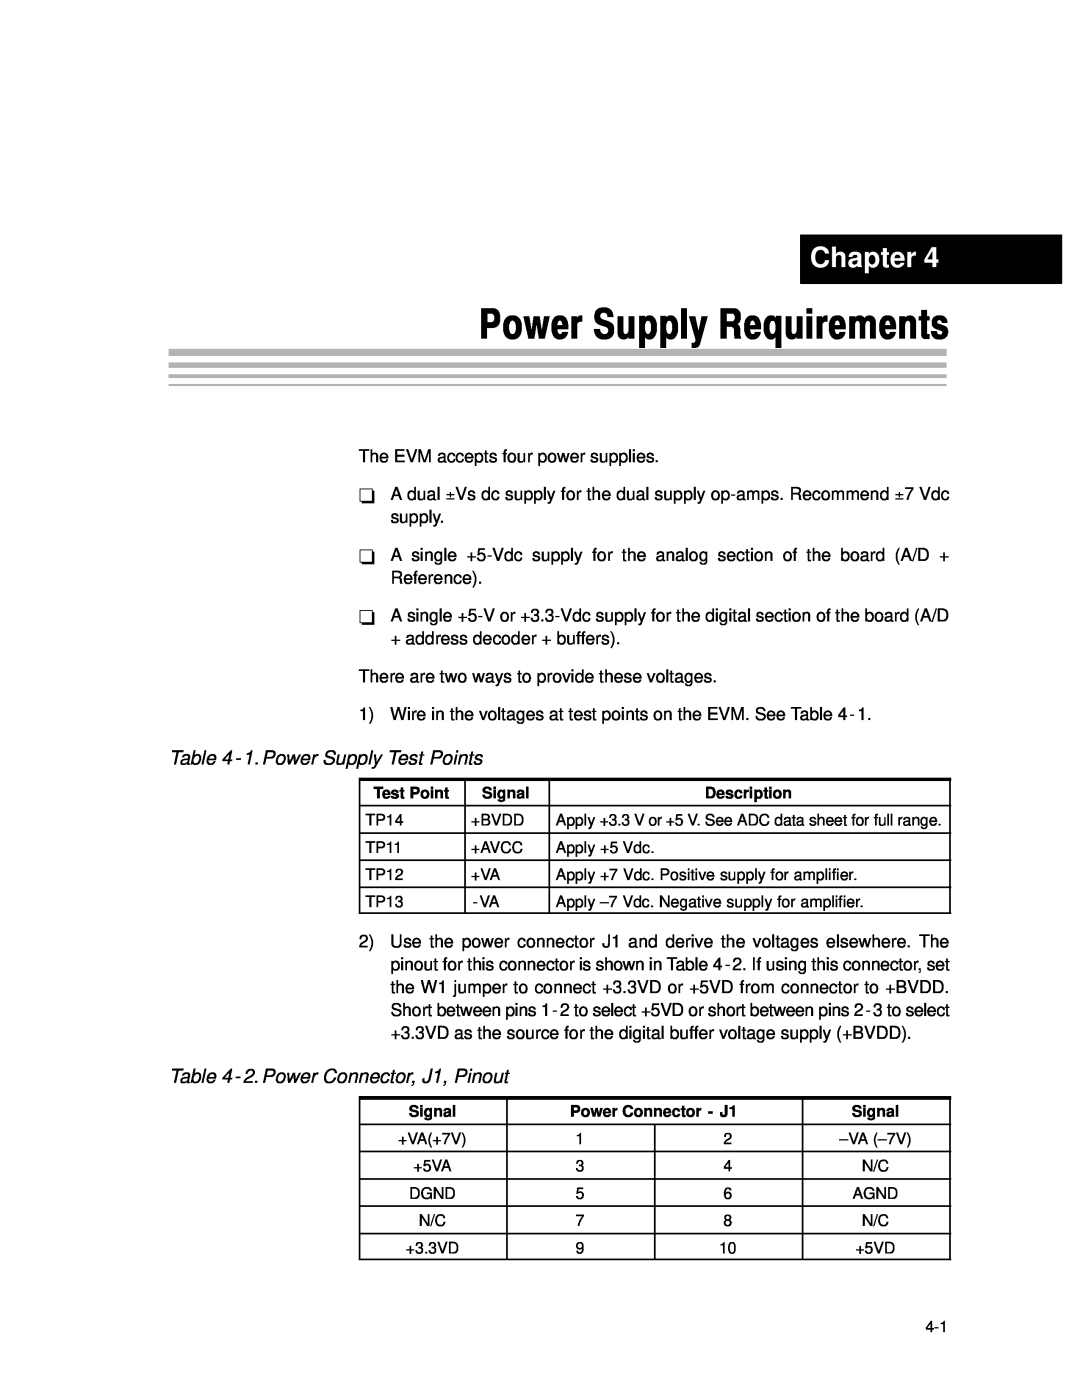 Texas Instruments ADS8402 EVM, ADS8412 EVM manual Power Supply Requirements, 1. Power Supply Test Points, Chapter 